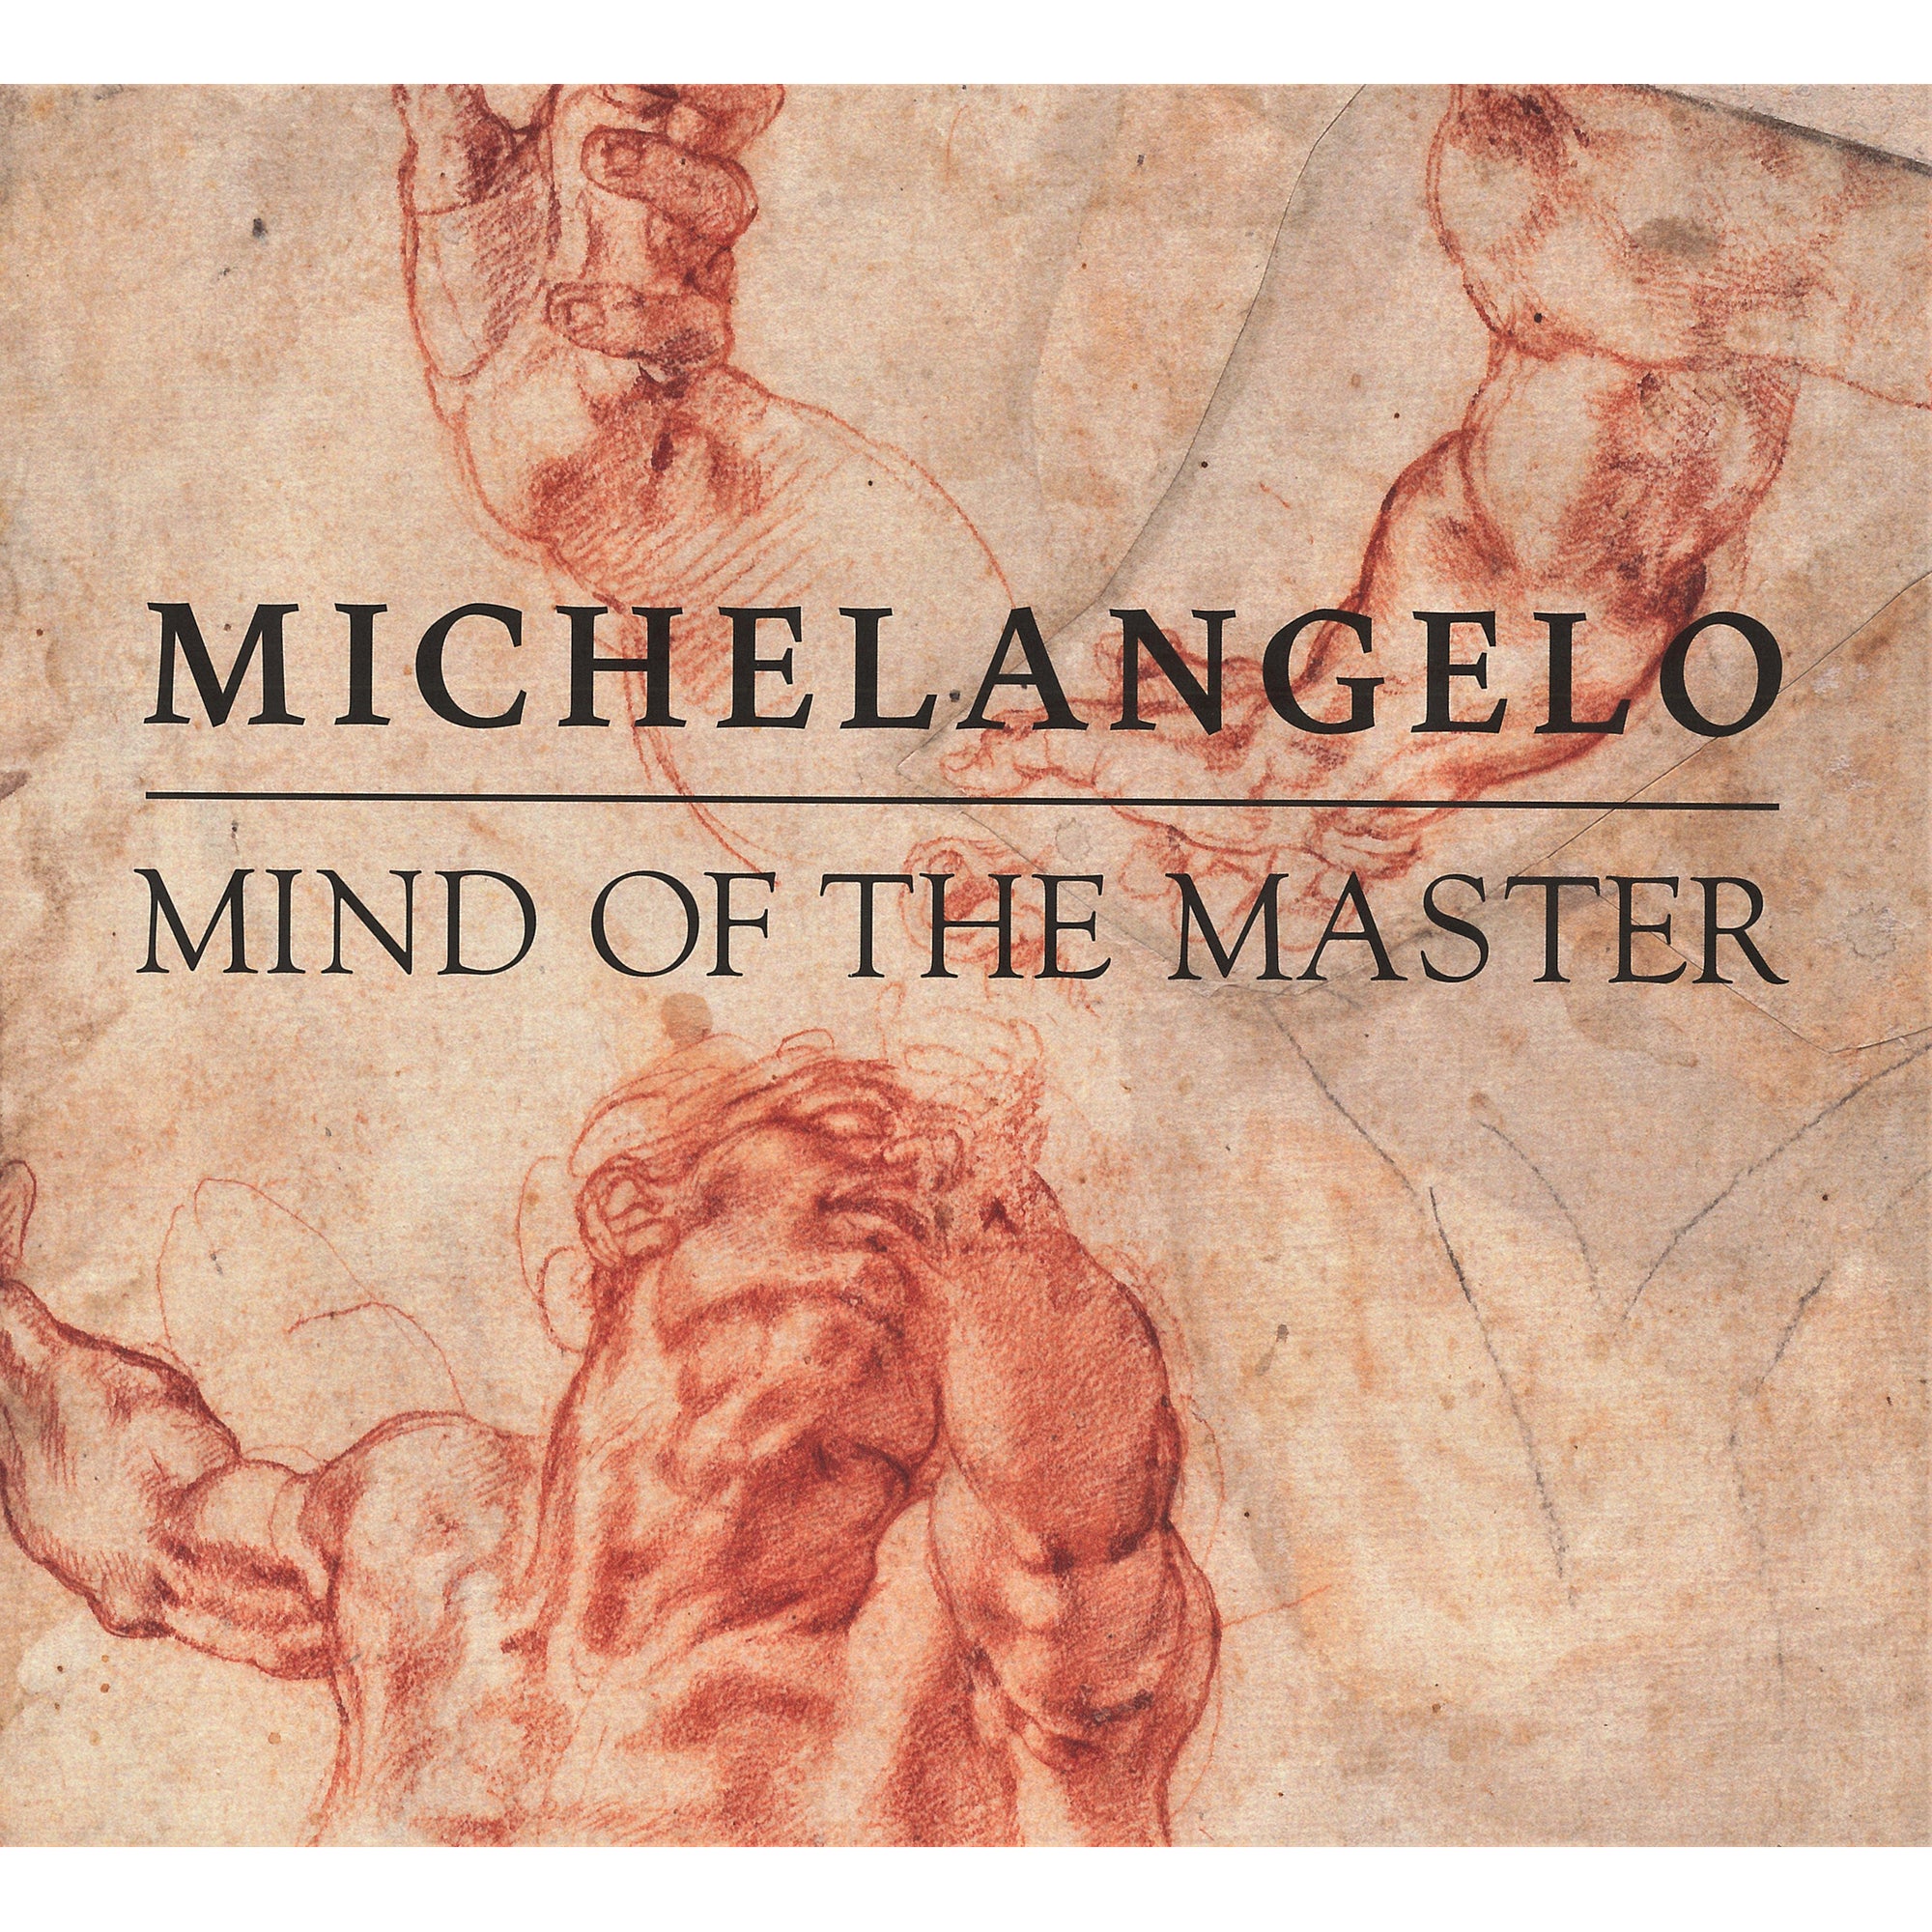 Michelangelo: Mind of the Master | Getty Store